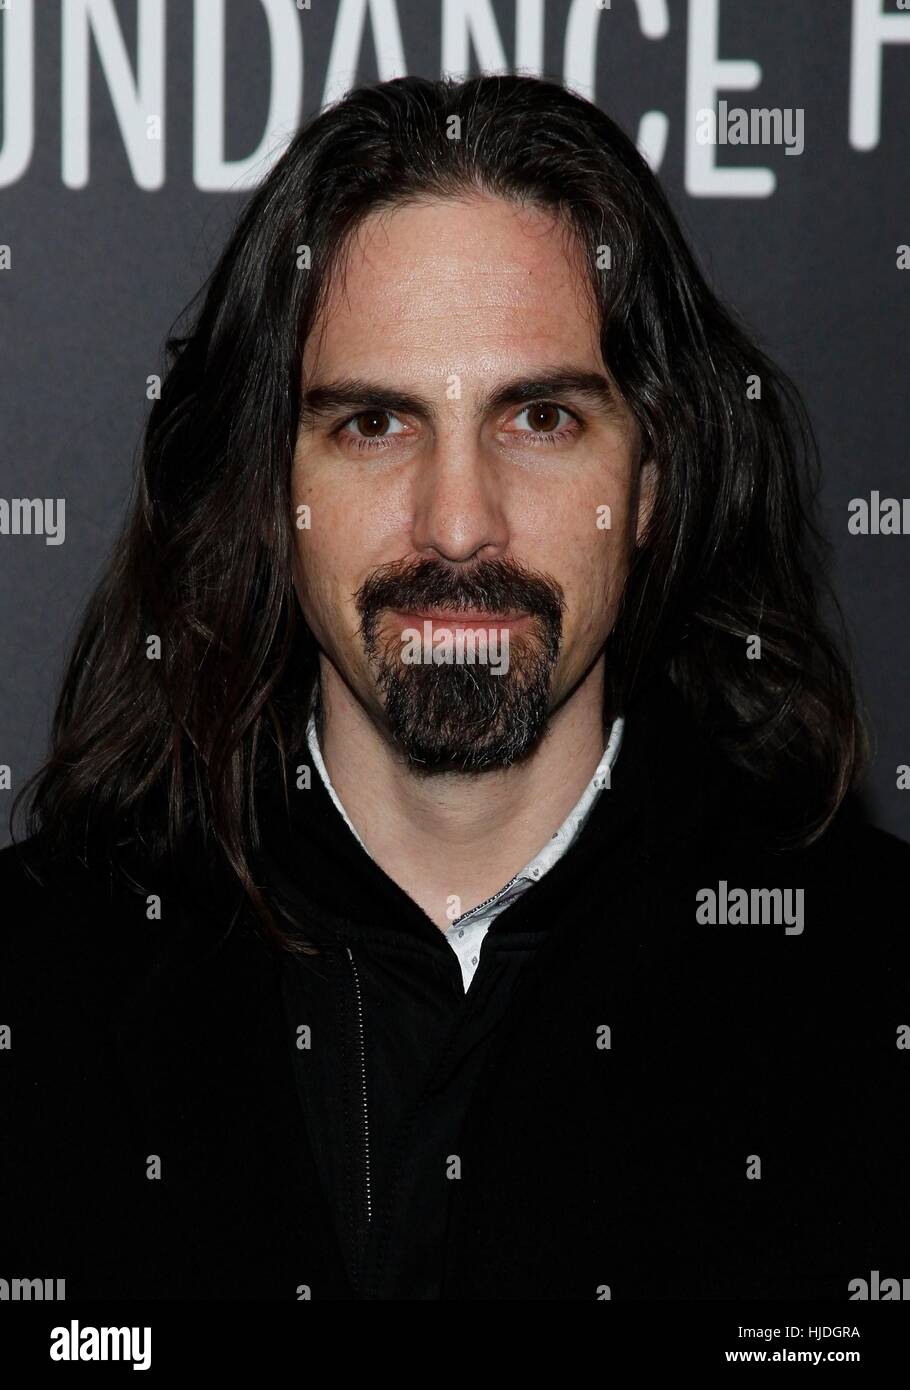 Park City, Utah, USA. 24th Jan, 2017. Bear McCreary at arrivals for REBEL IN THE RYE Premiere at Sundance Film Festival 2017, Eccles Theatre, Park City, UT January 24, 2017. Credit: James Atoa/Everett Collection/Alamy Live News Stock Photo